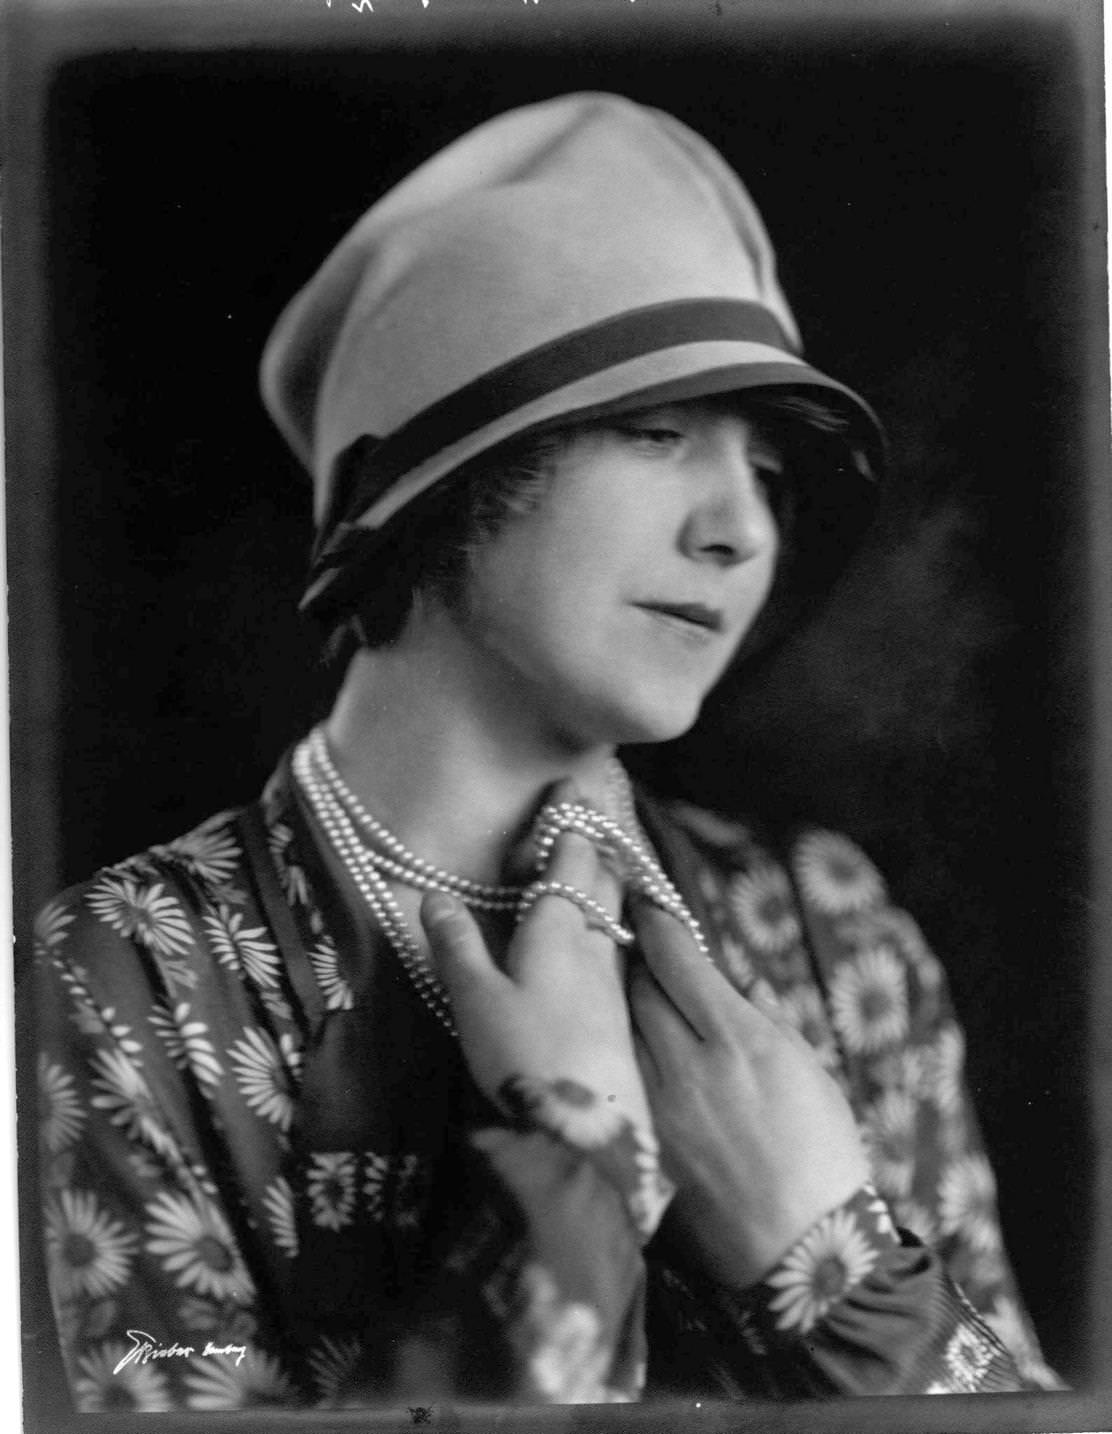 A young woman modelling a floral print top and a cloche hat, Hamburg, 1924.